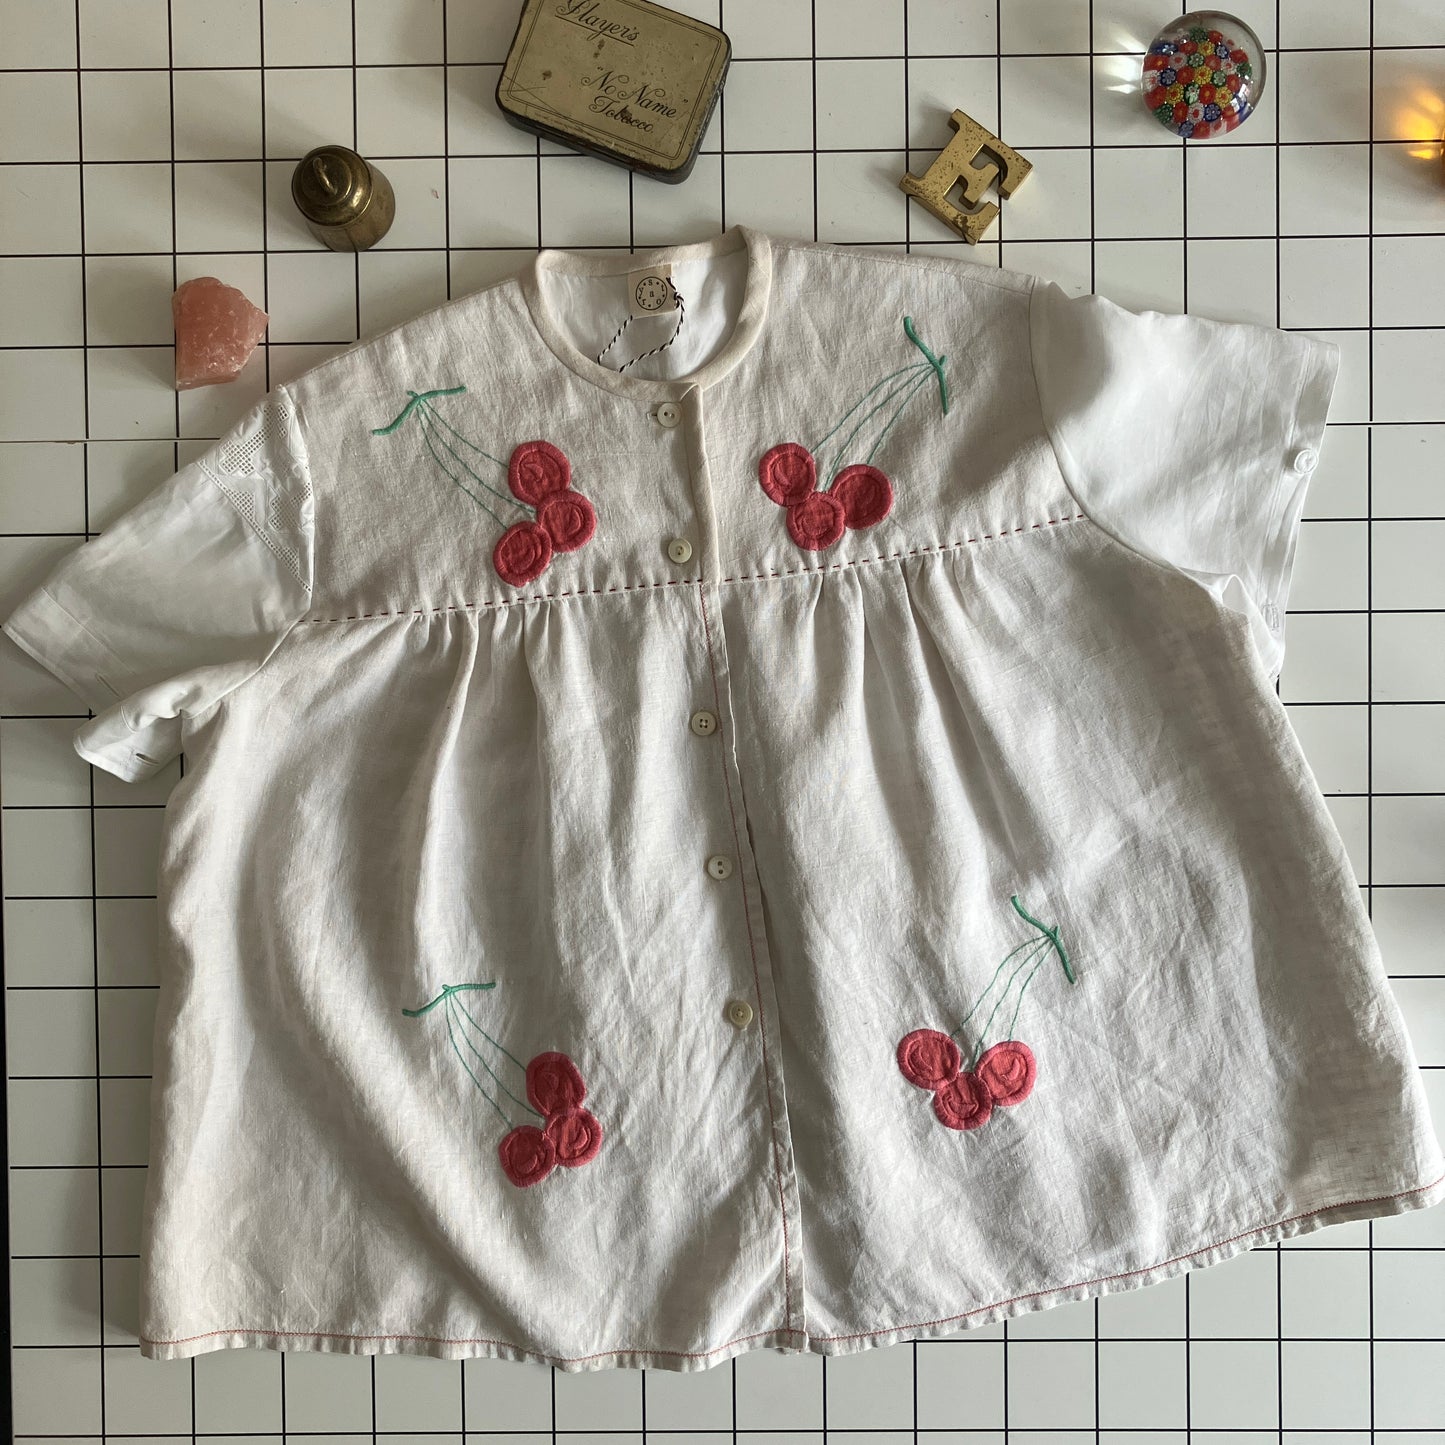 Top made from a patchwork of a recycled linen tablecloth with cherry motifs and antique bed linen